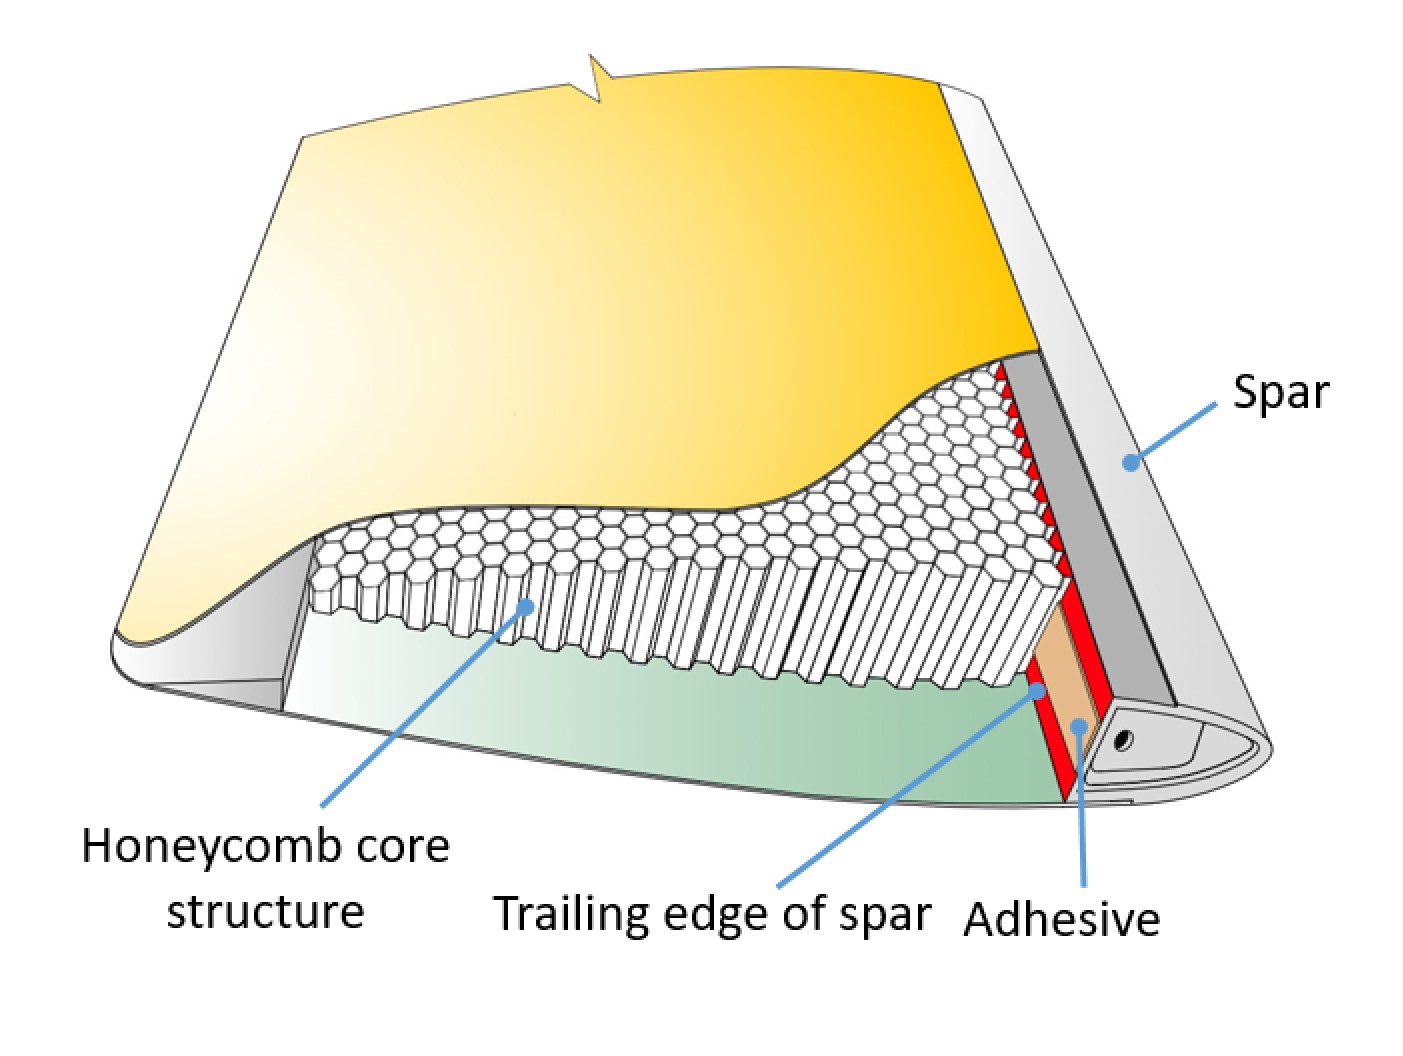 Diagram showing where the adhesive is applied between the trailing edge of the spar and the honeycomb core structure (Source: TSB)